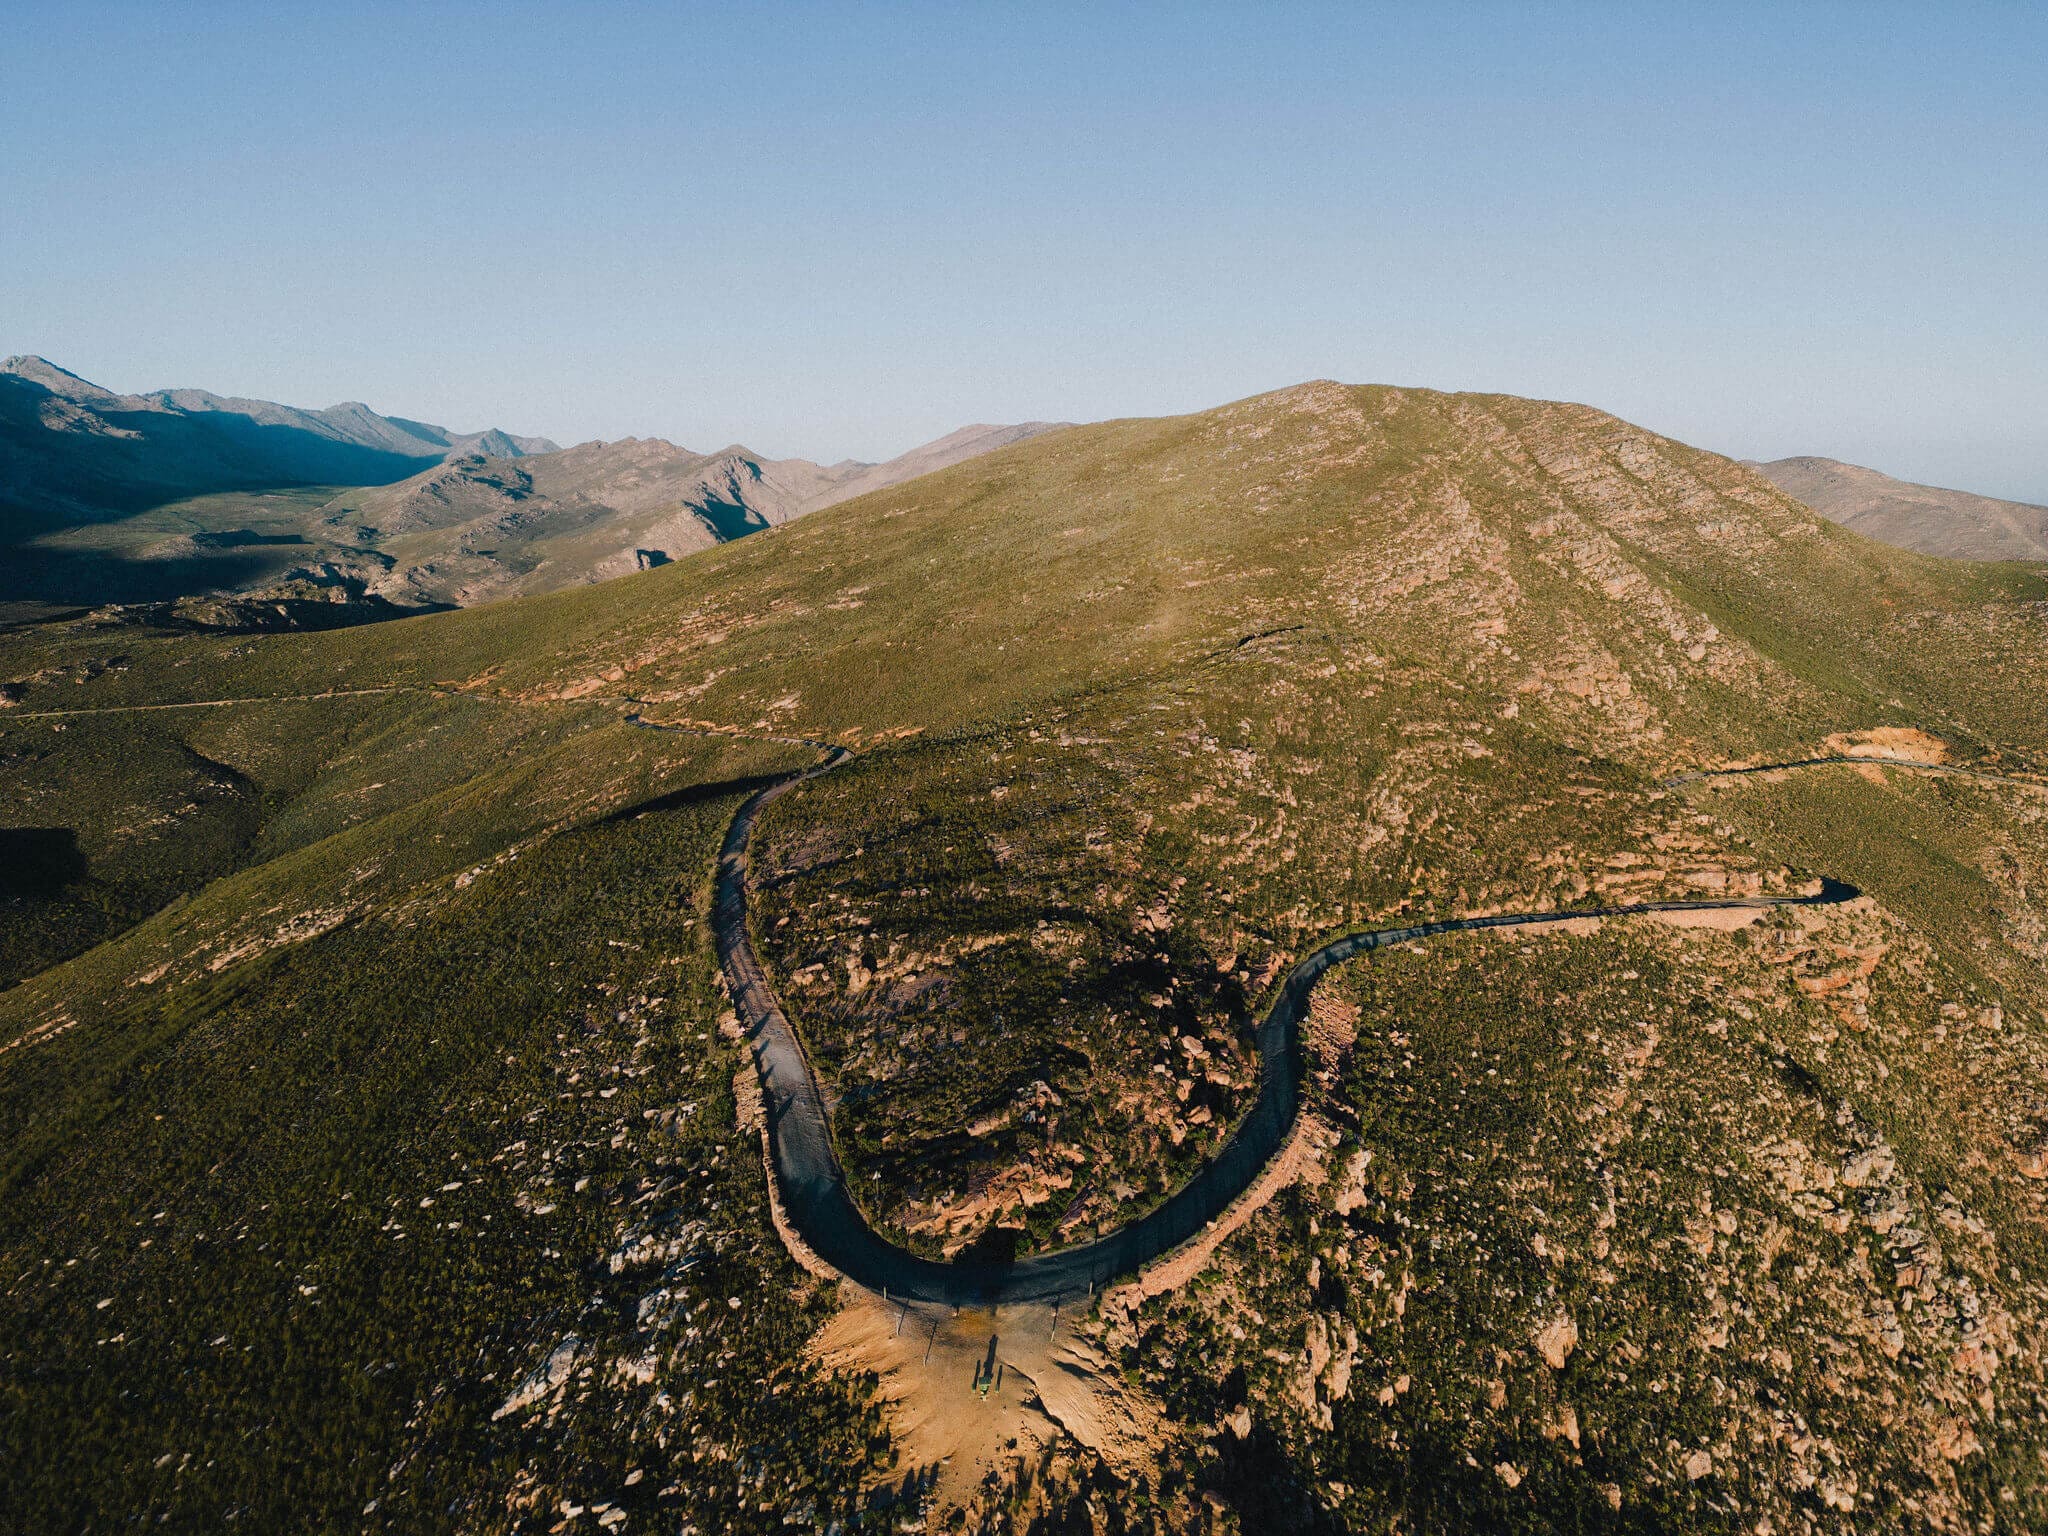 The winding Swartberg Pass in South Africa's Klein Karoo